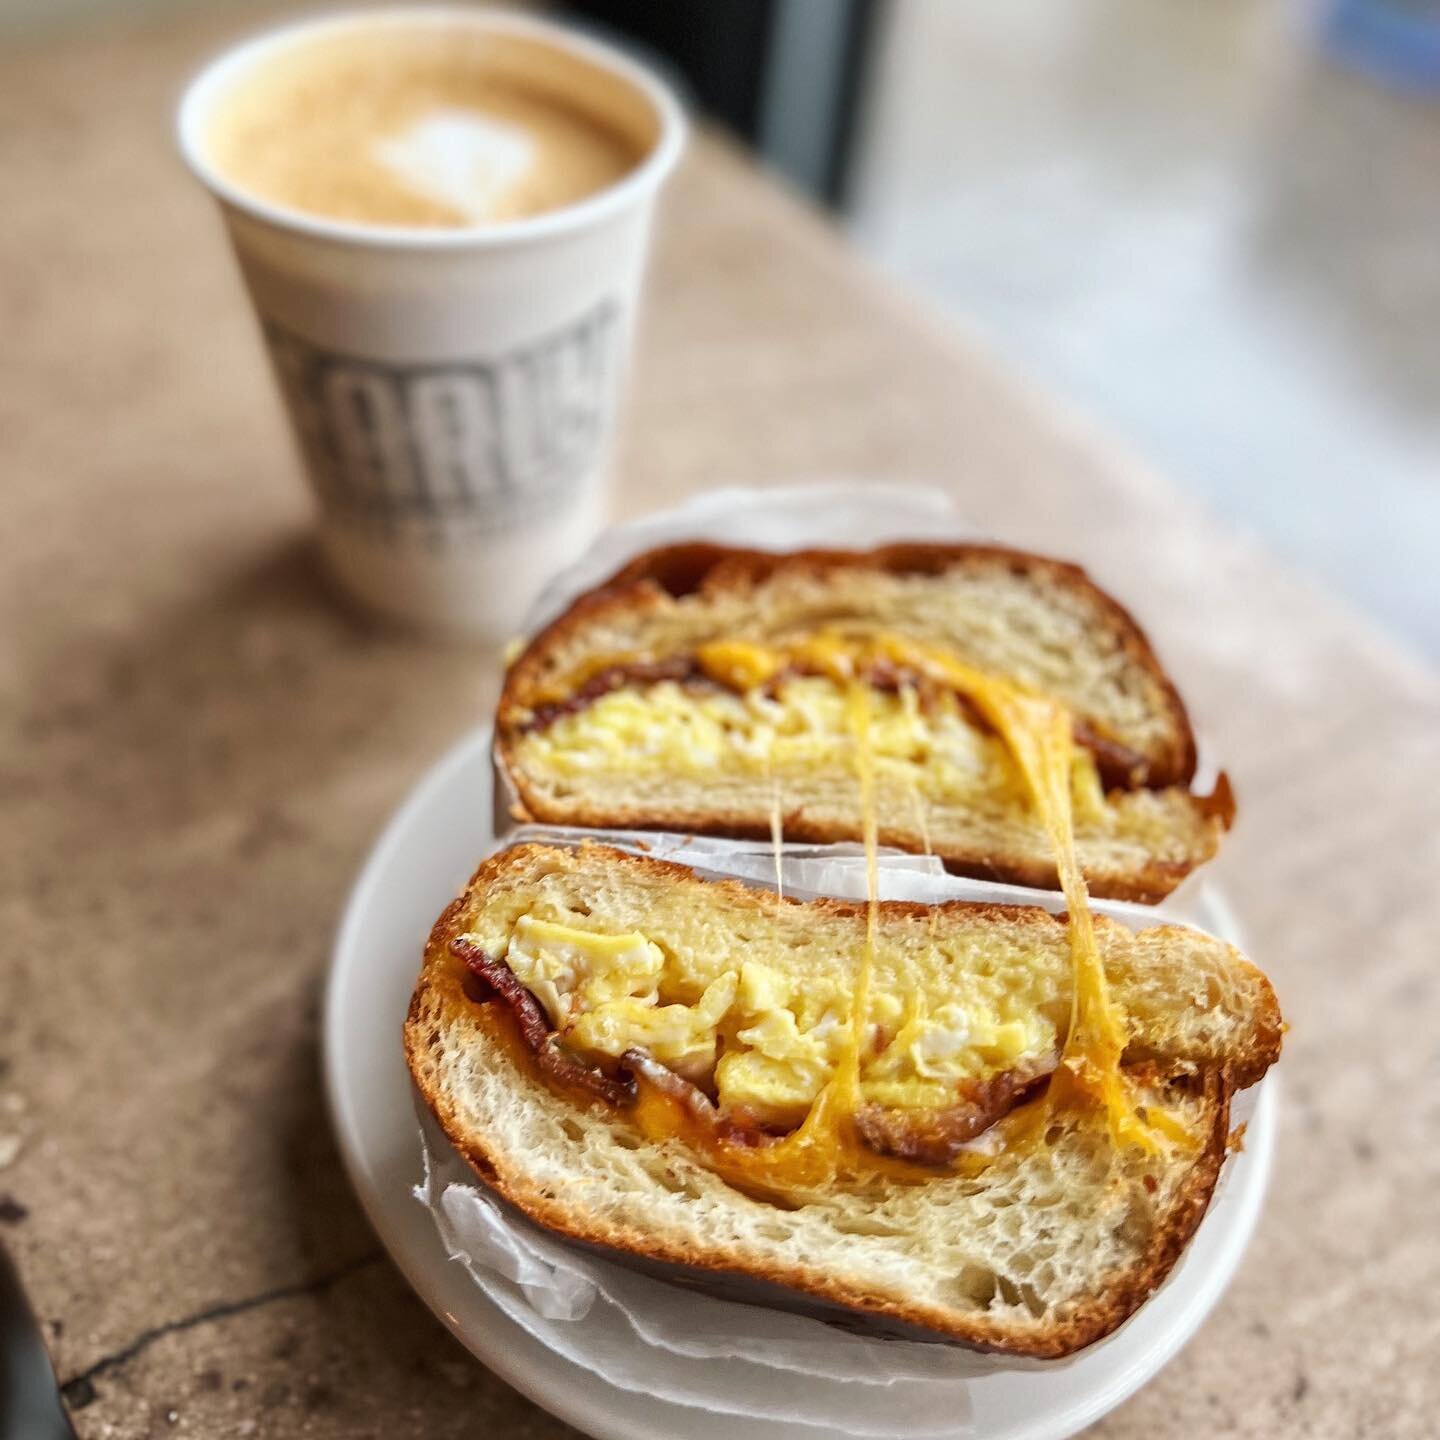 Rise and shine 🐣 #baconeggandcheese @partnerscoffee